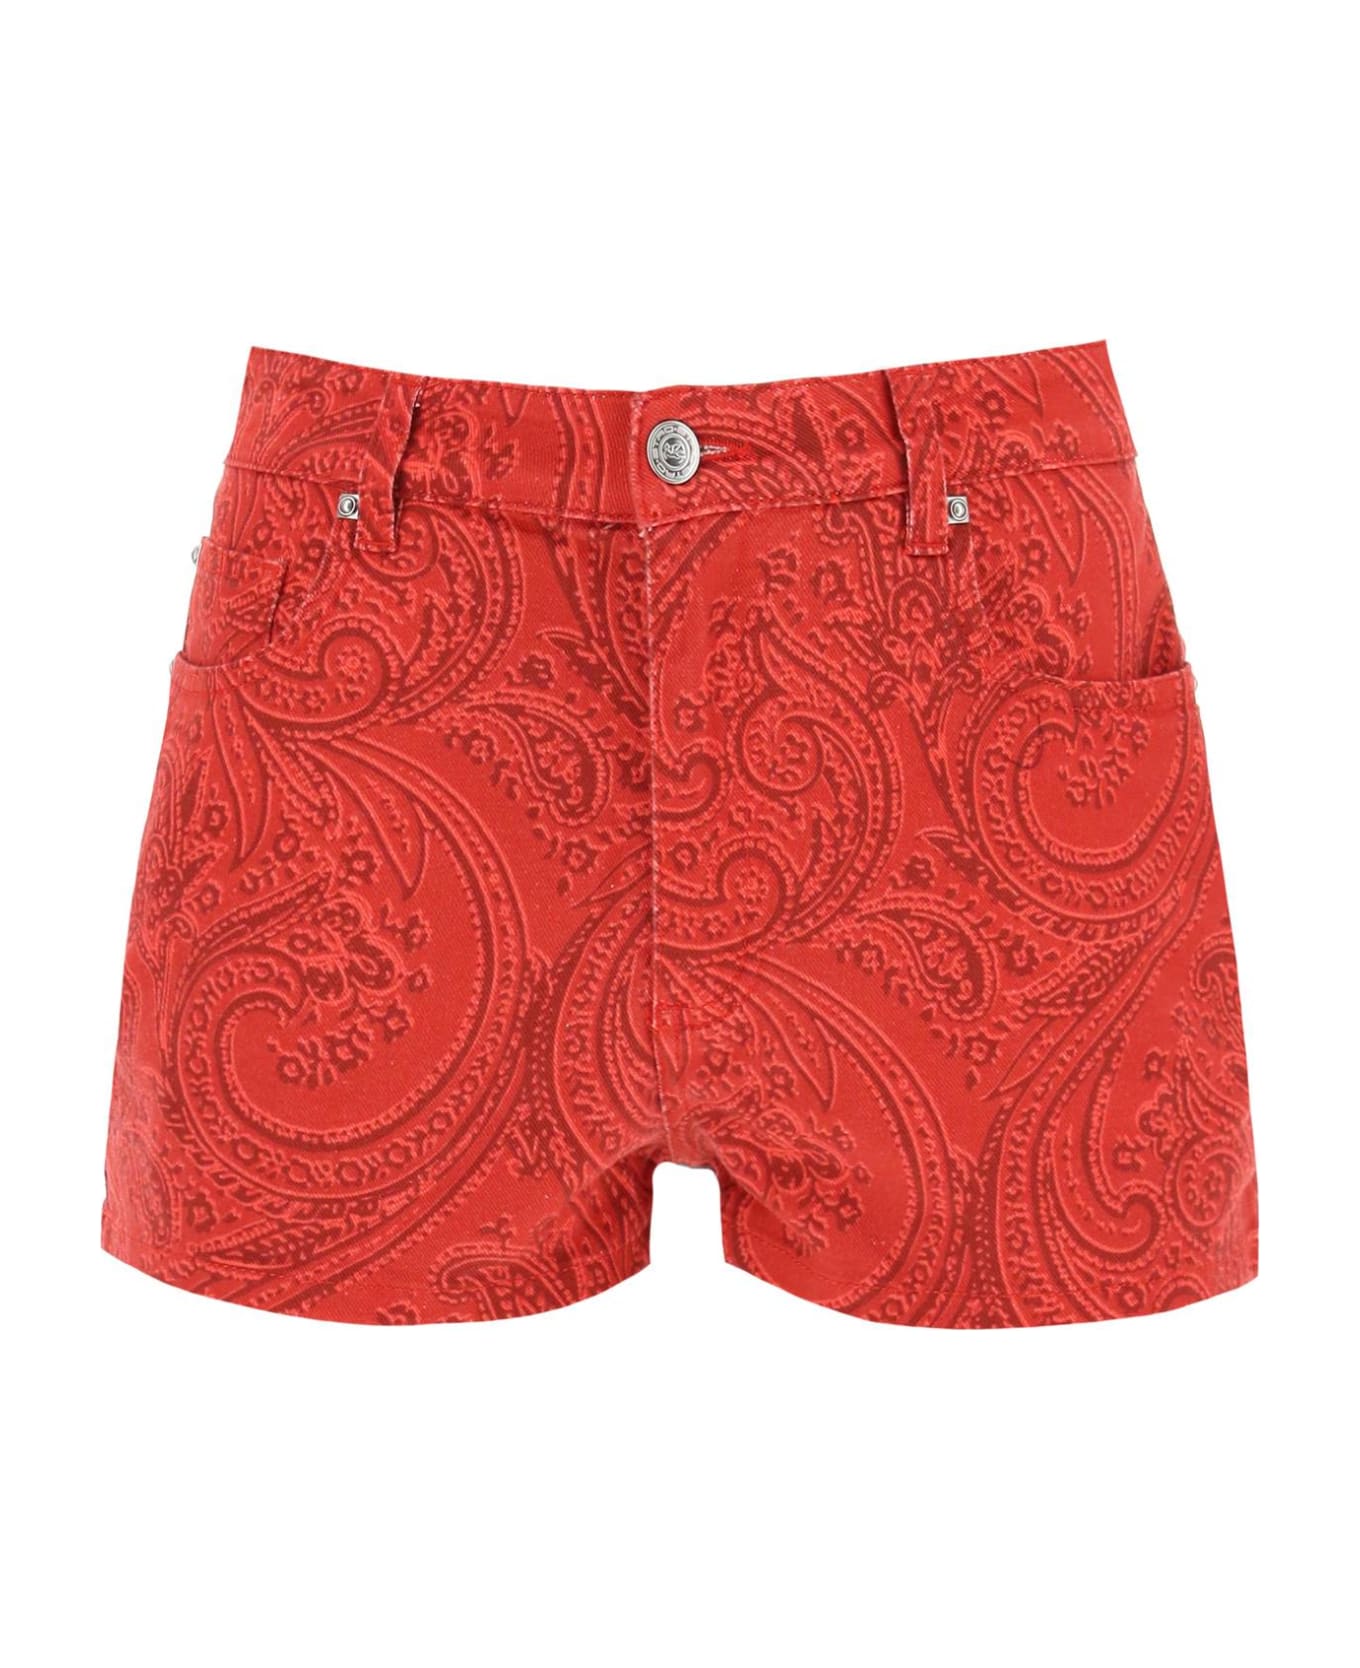 Etro Paisley Print Shorts - RED (Red)